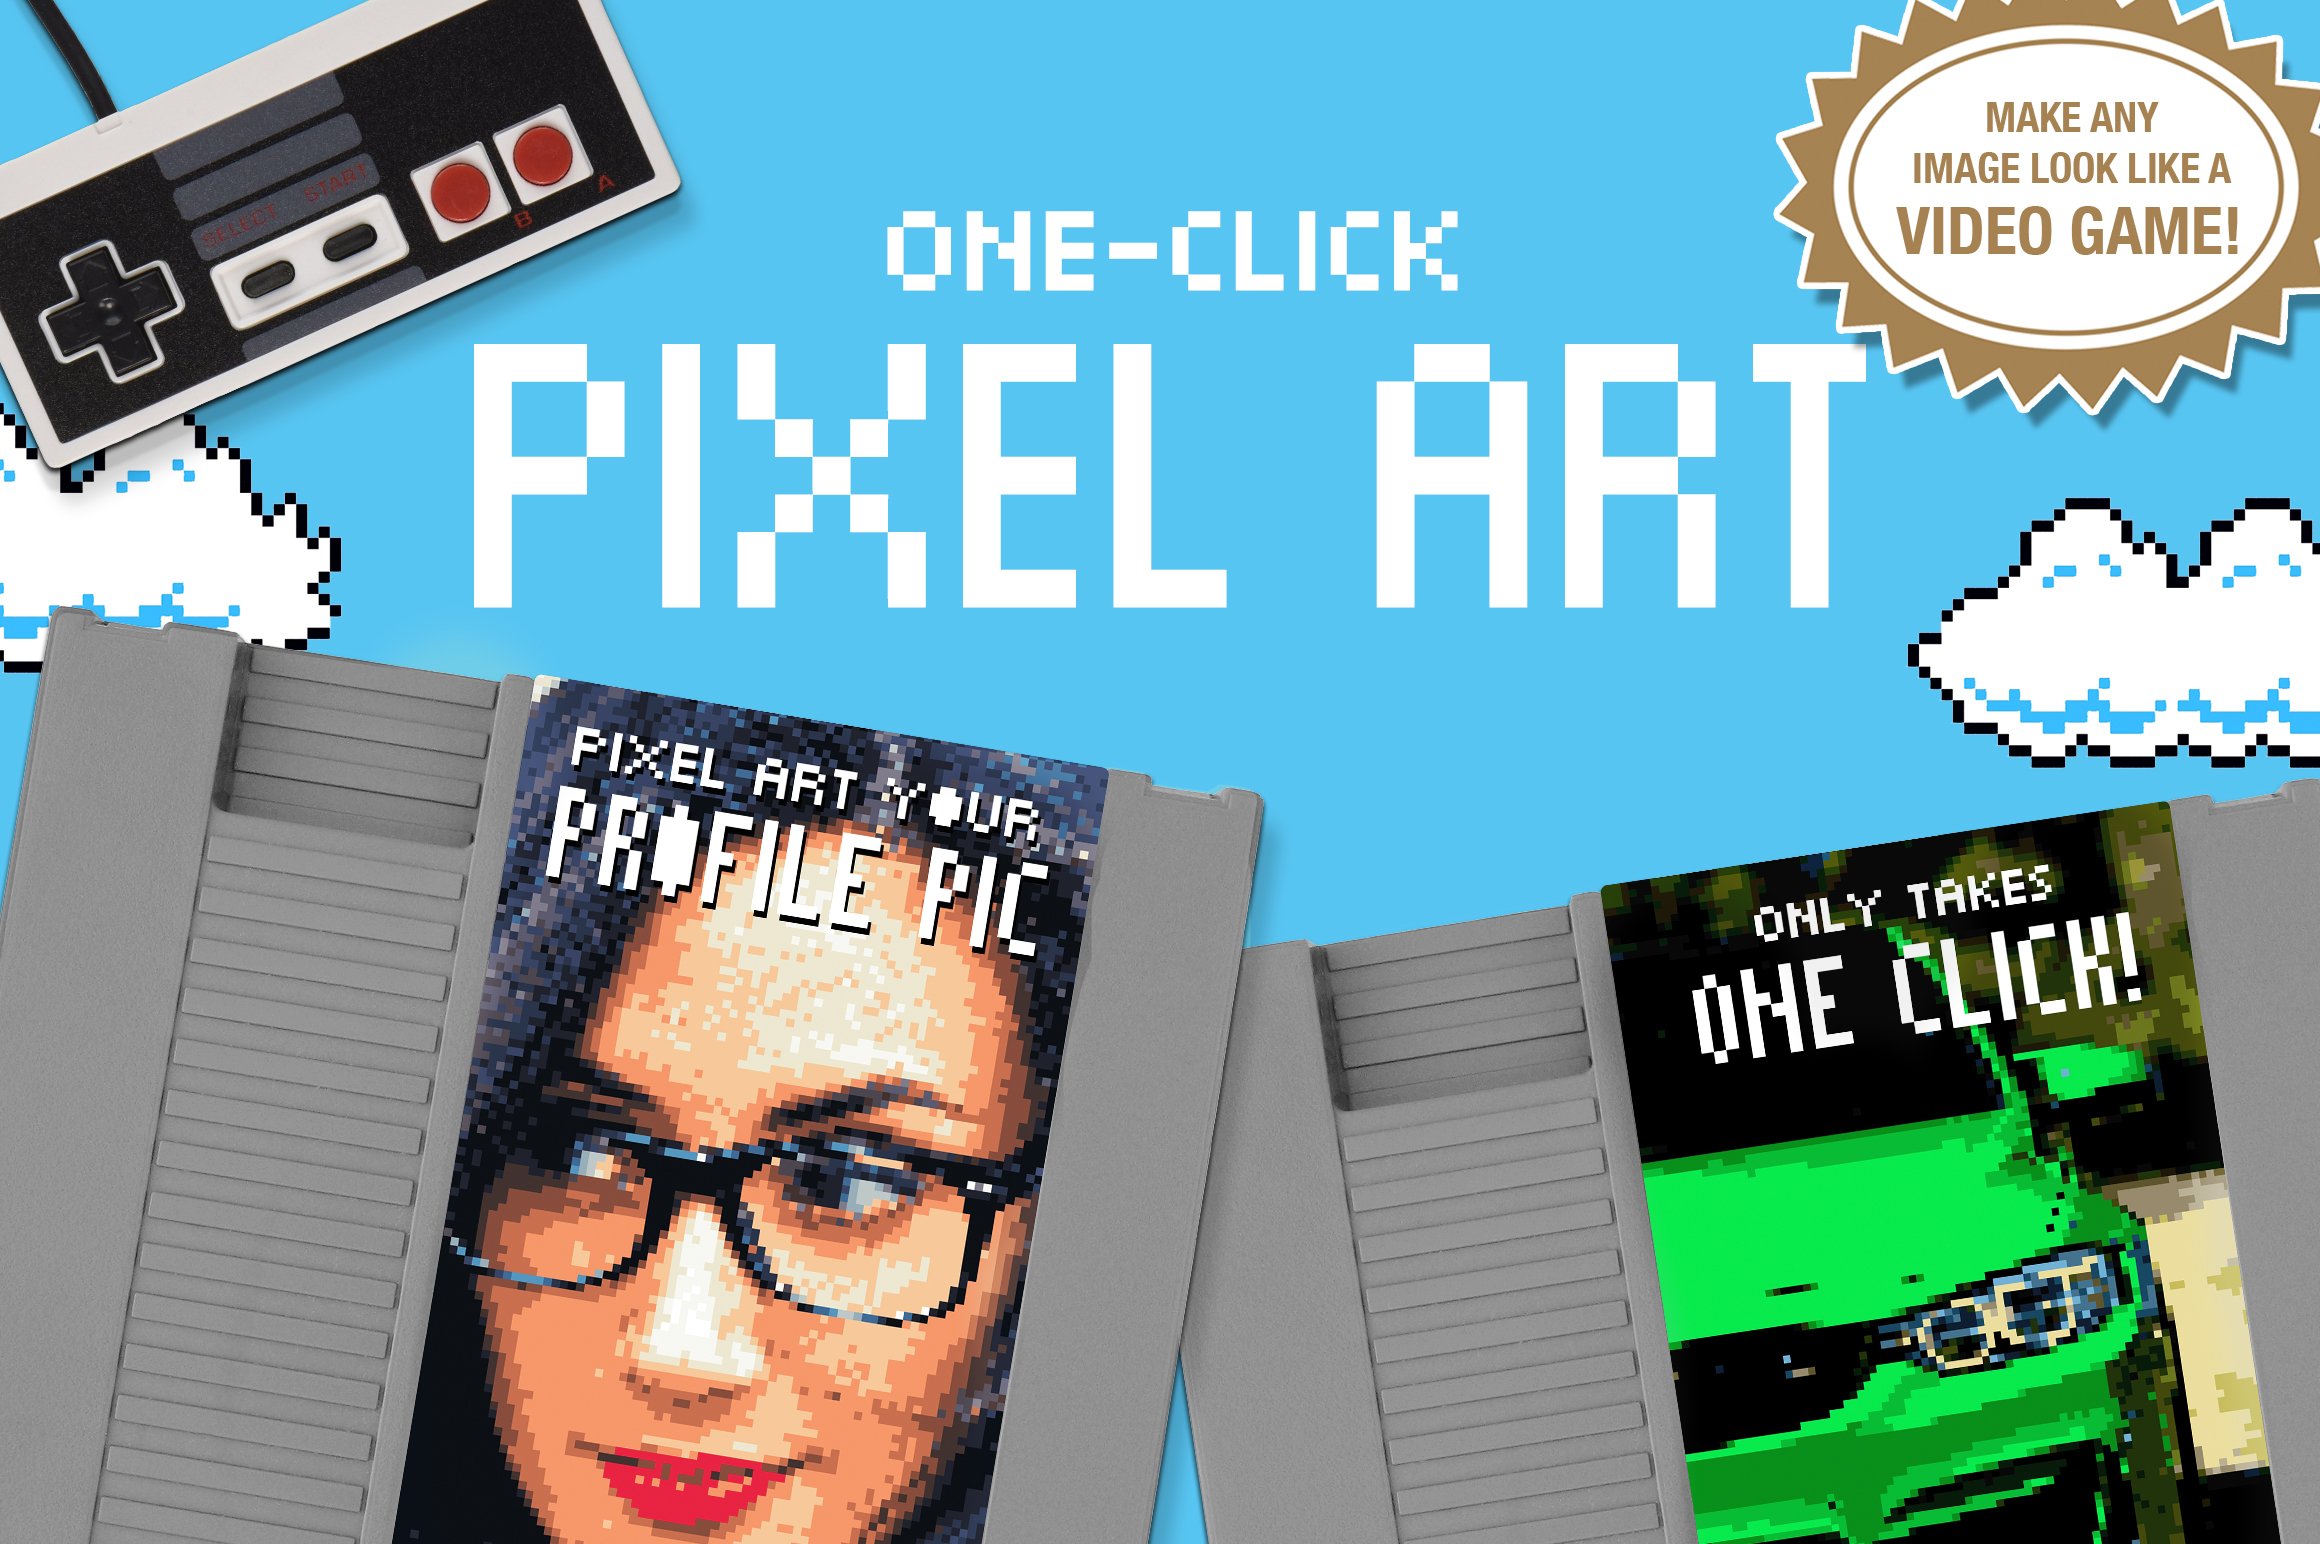 Pixel Art - One Click Actionscover image.